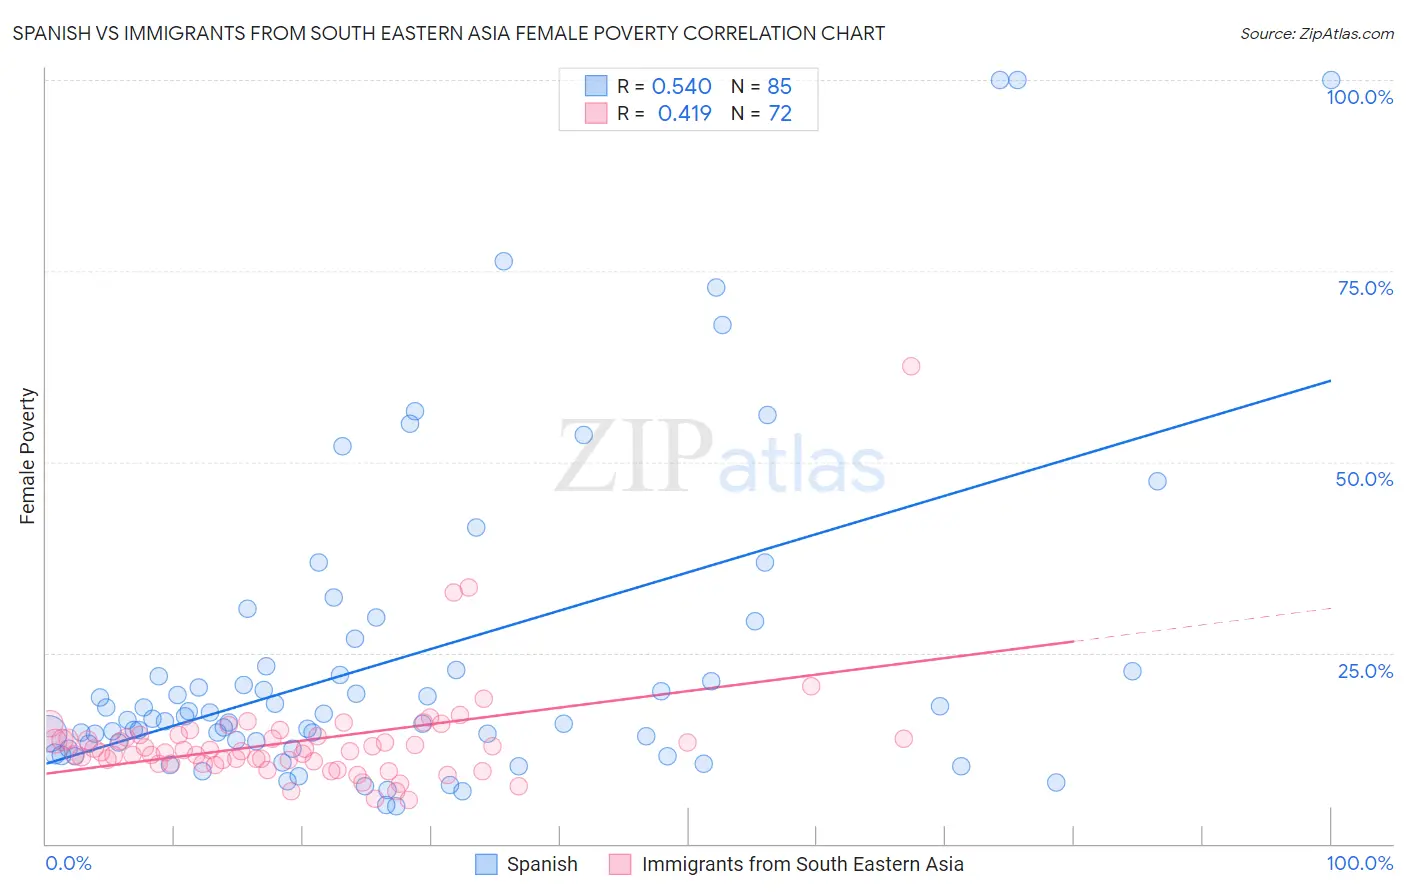 Spanish vs Immigrants from South Eastern Asia Female Poverty